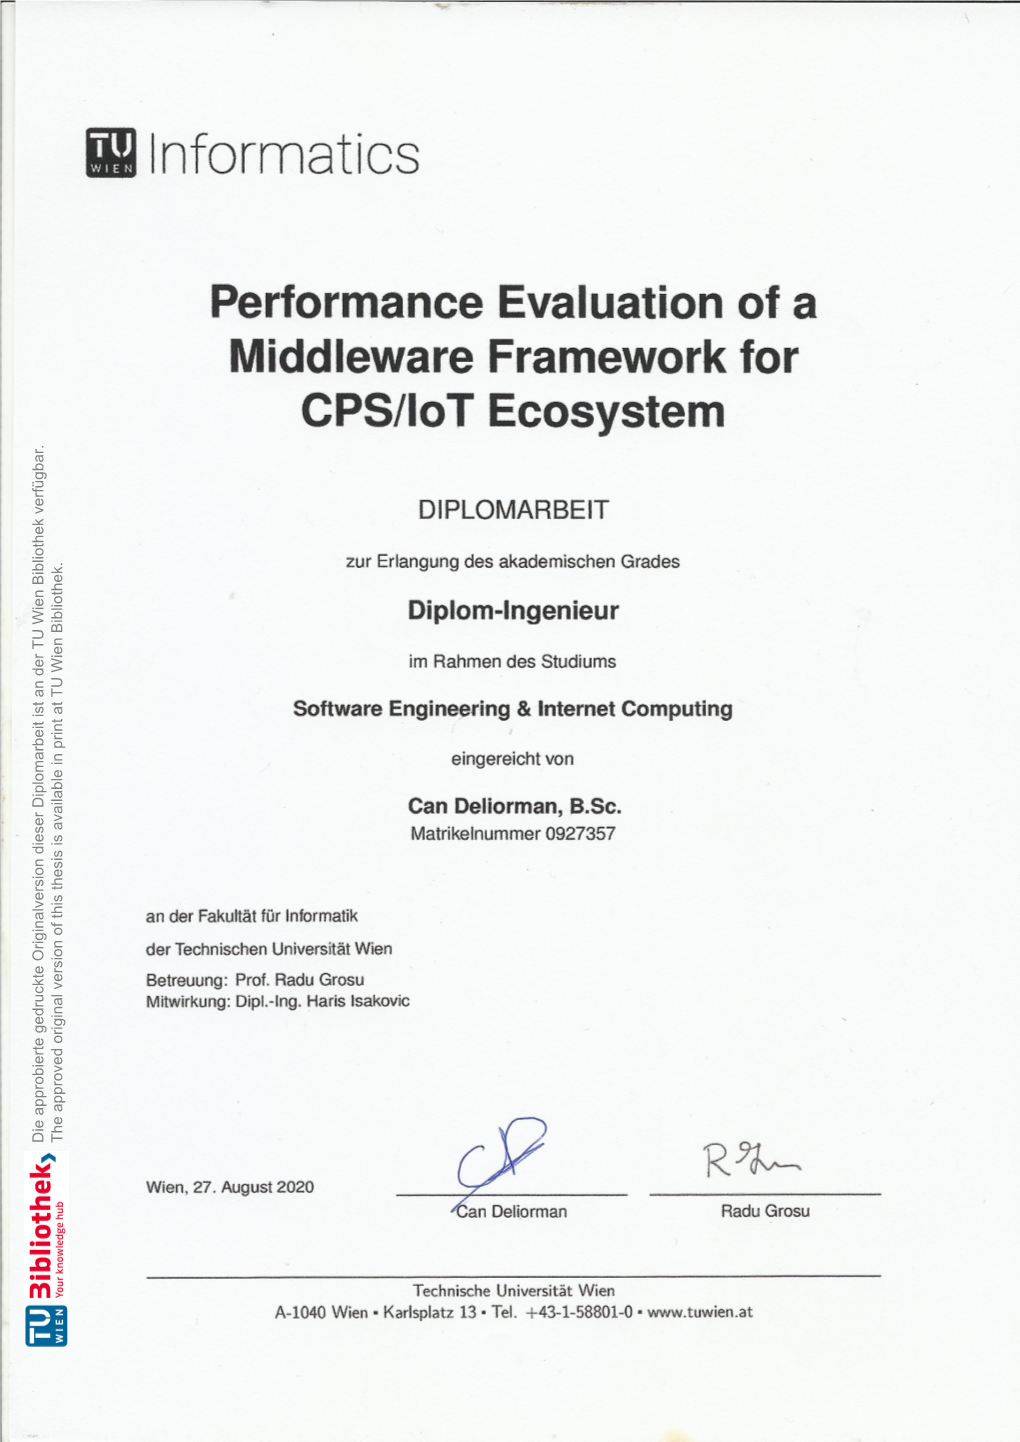 Performance Evaluation of a Middleware Framework for CPS/Iot